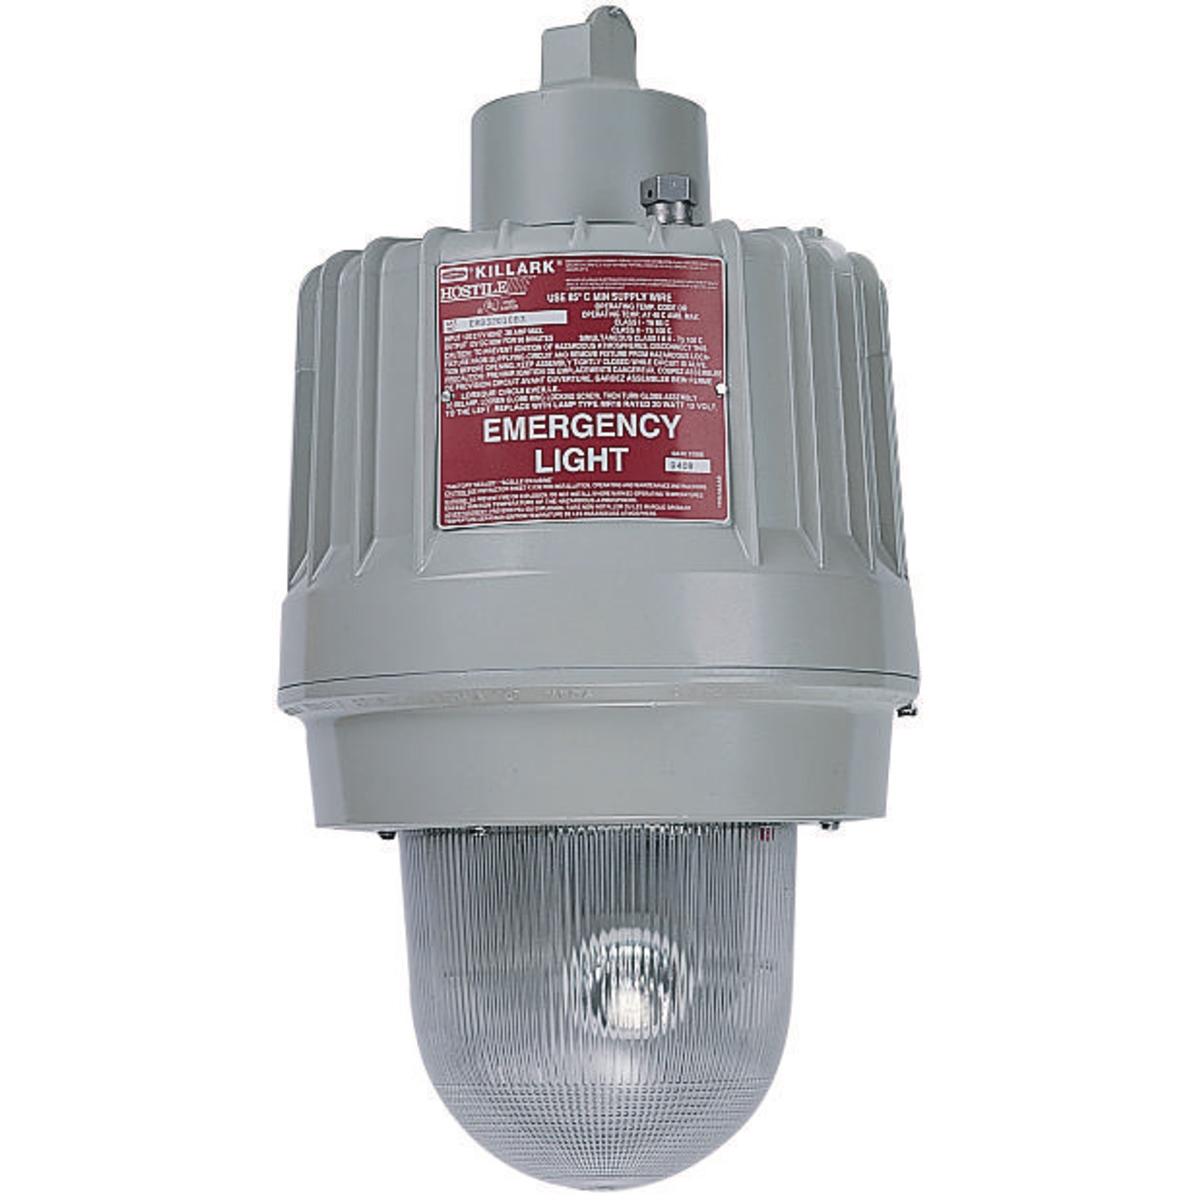 Hubbell EBB32010B2-TDR EBB Series Emergency Hazardous Location Three Lamp 3/4" Wall Mount with 15 min Time Delay  ; Patented design three high intensity lamps can be independently adjusted to provide custom emergency lighting to a specific area ; Three 20 watt MR16 lamps includ